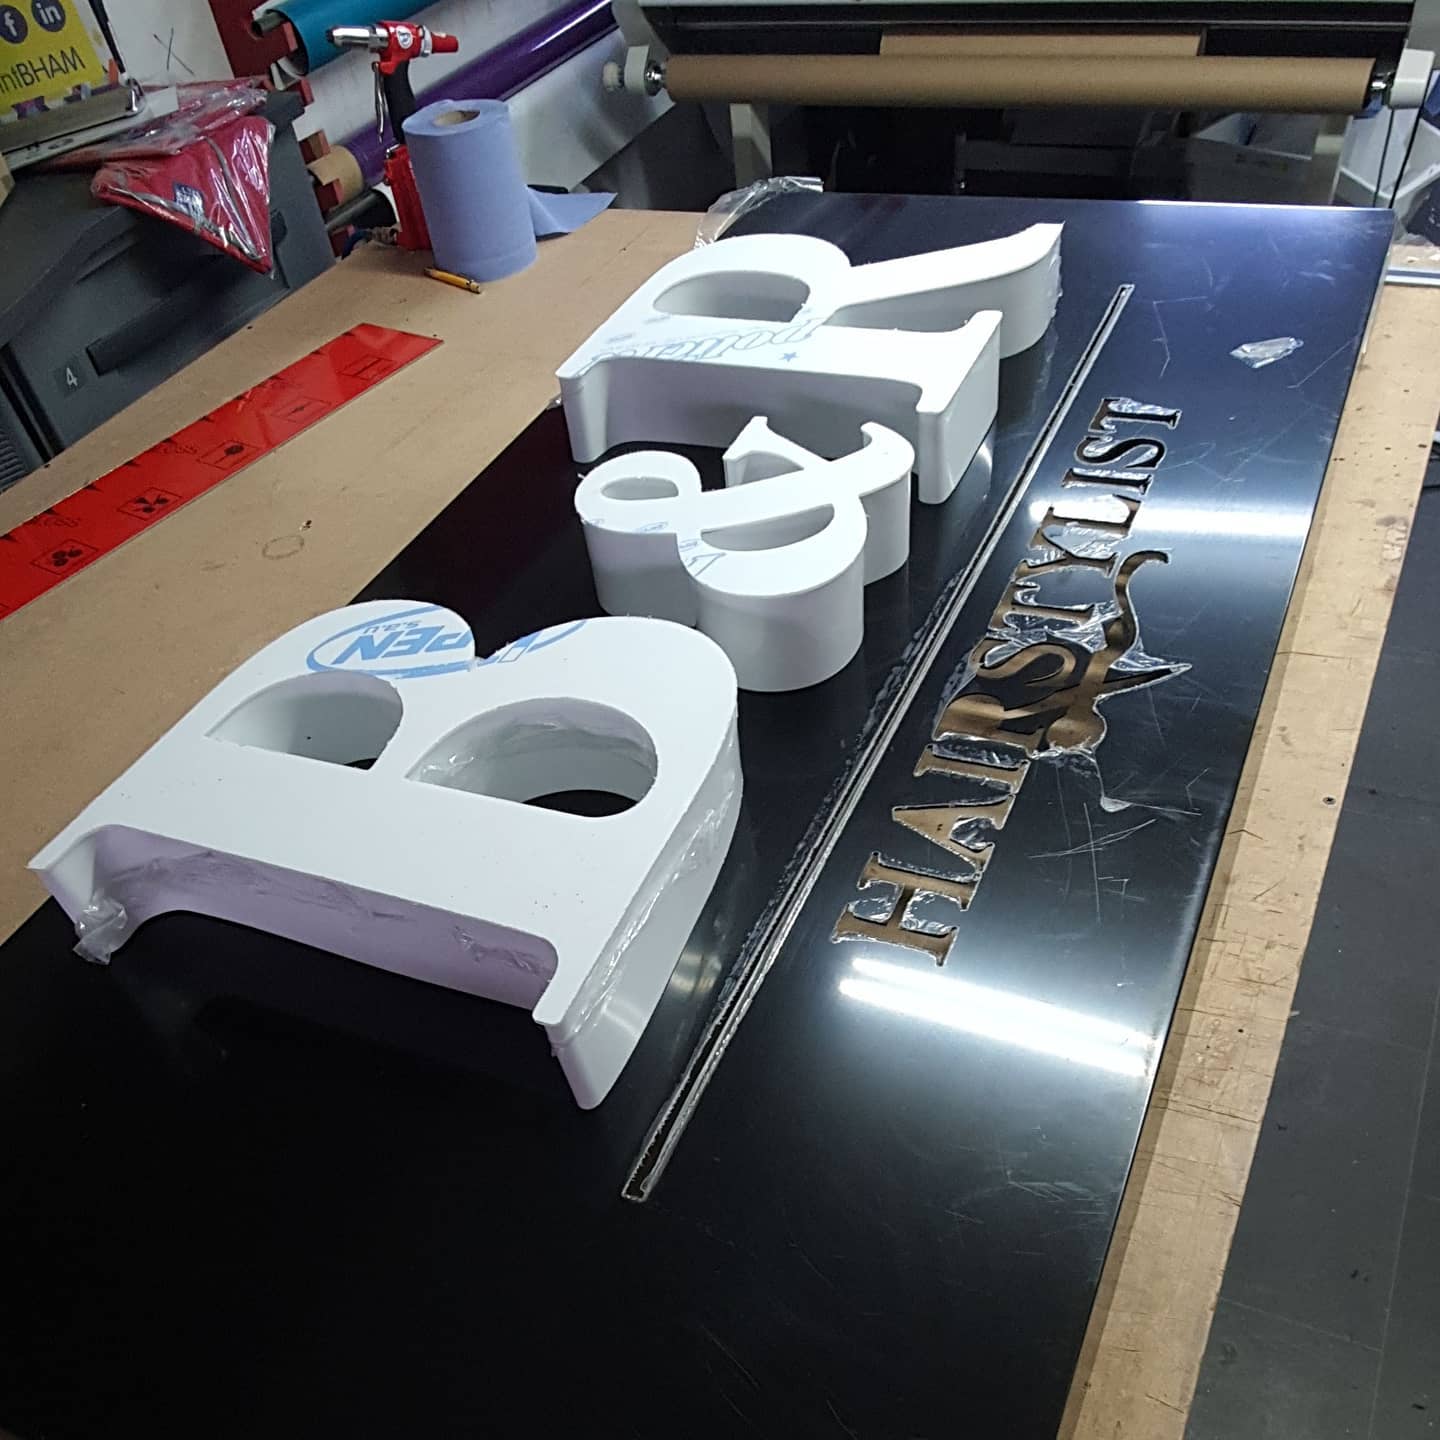 Watch this space. Sign going up soon.

3D Built up letters on a tray with Fret cut letters backlit with LEDs.